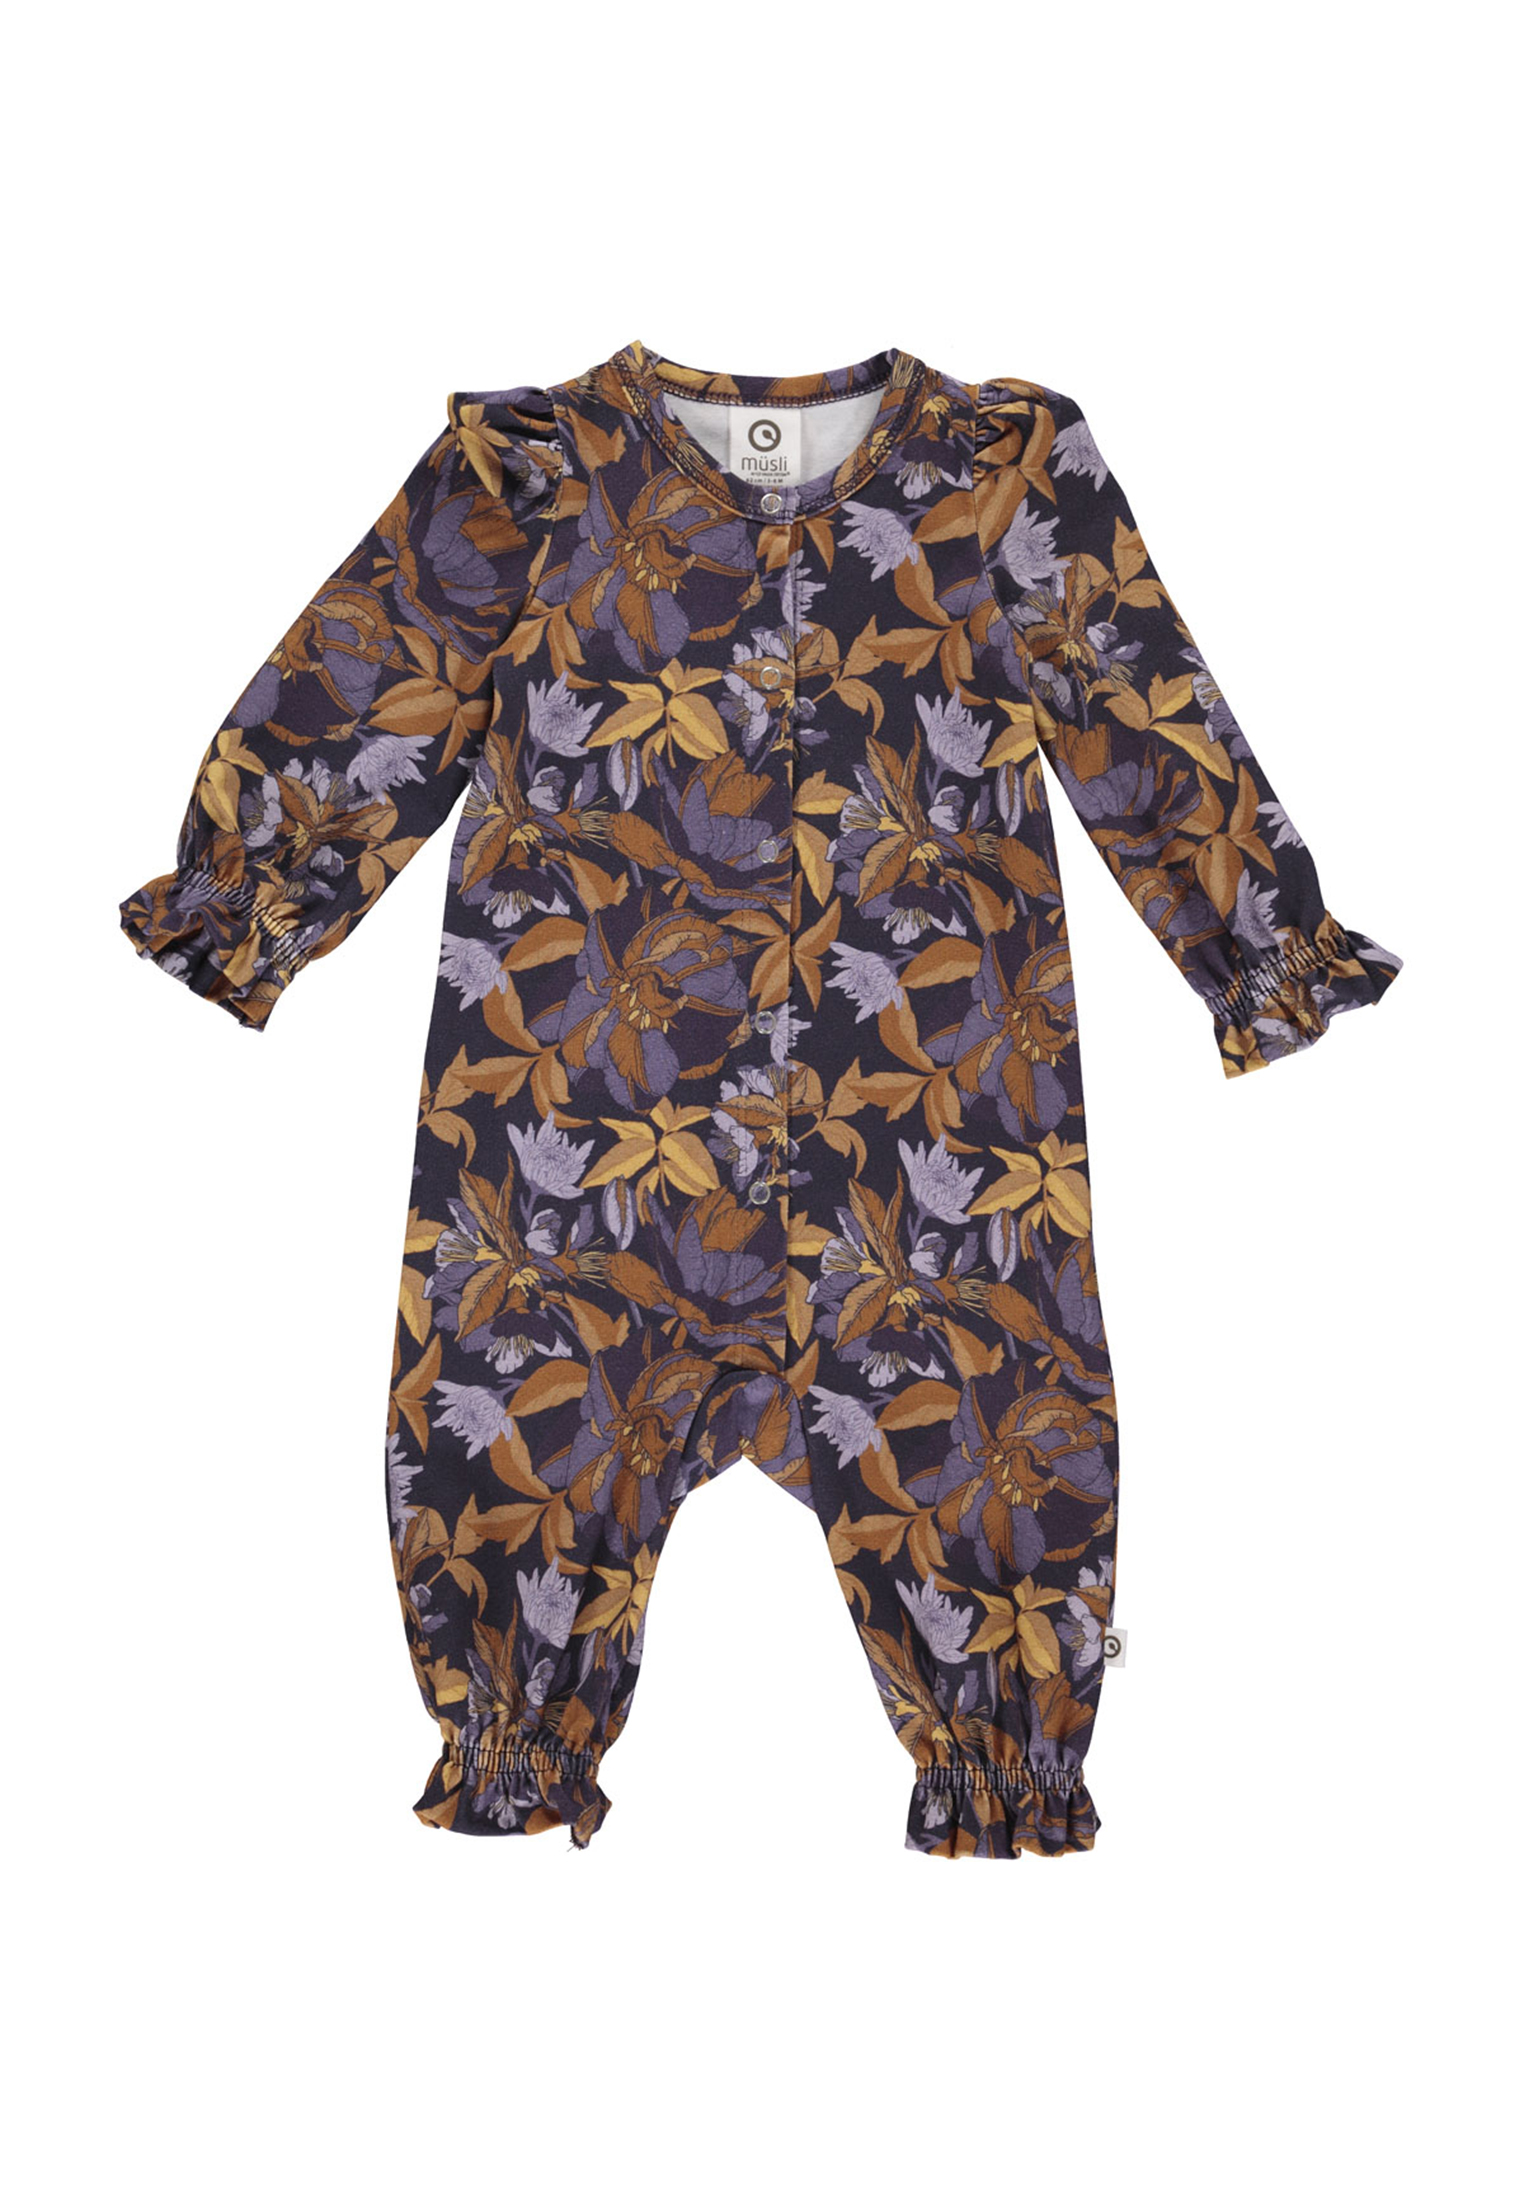 MAMA.LICIOUS Baby one-piece suit - 1584059300